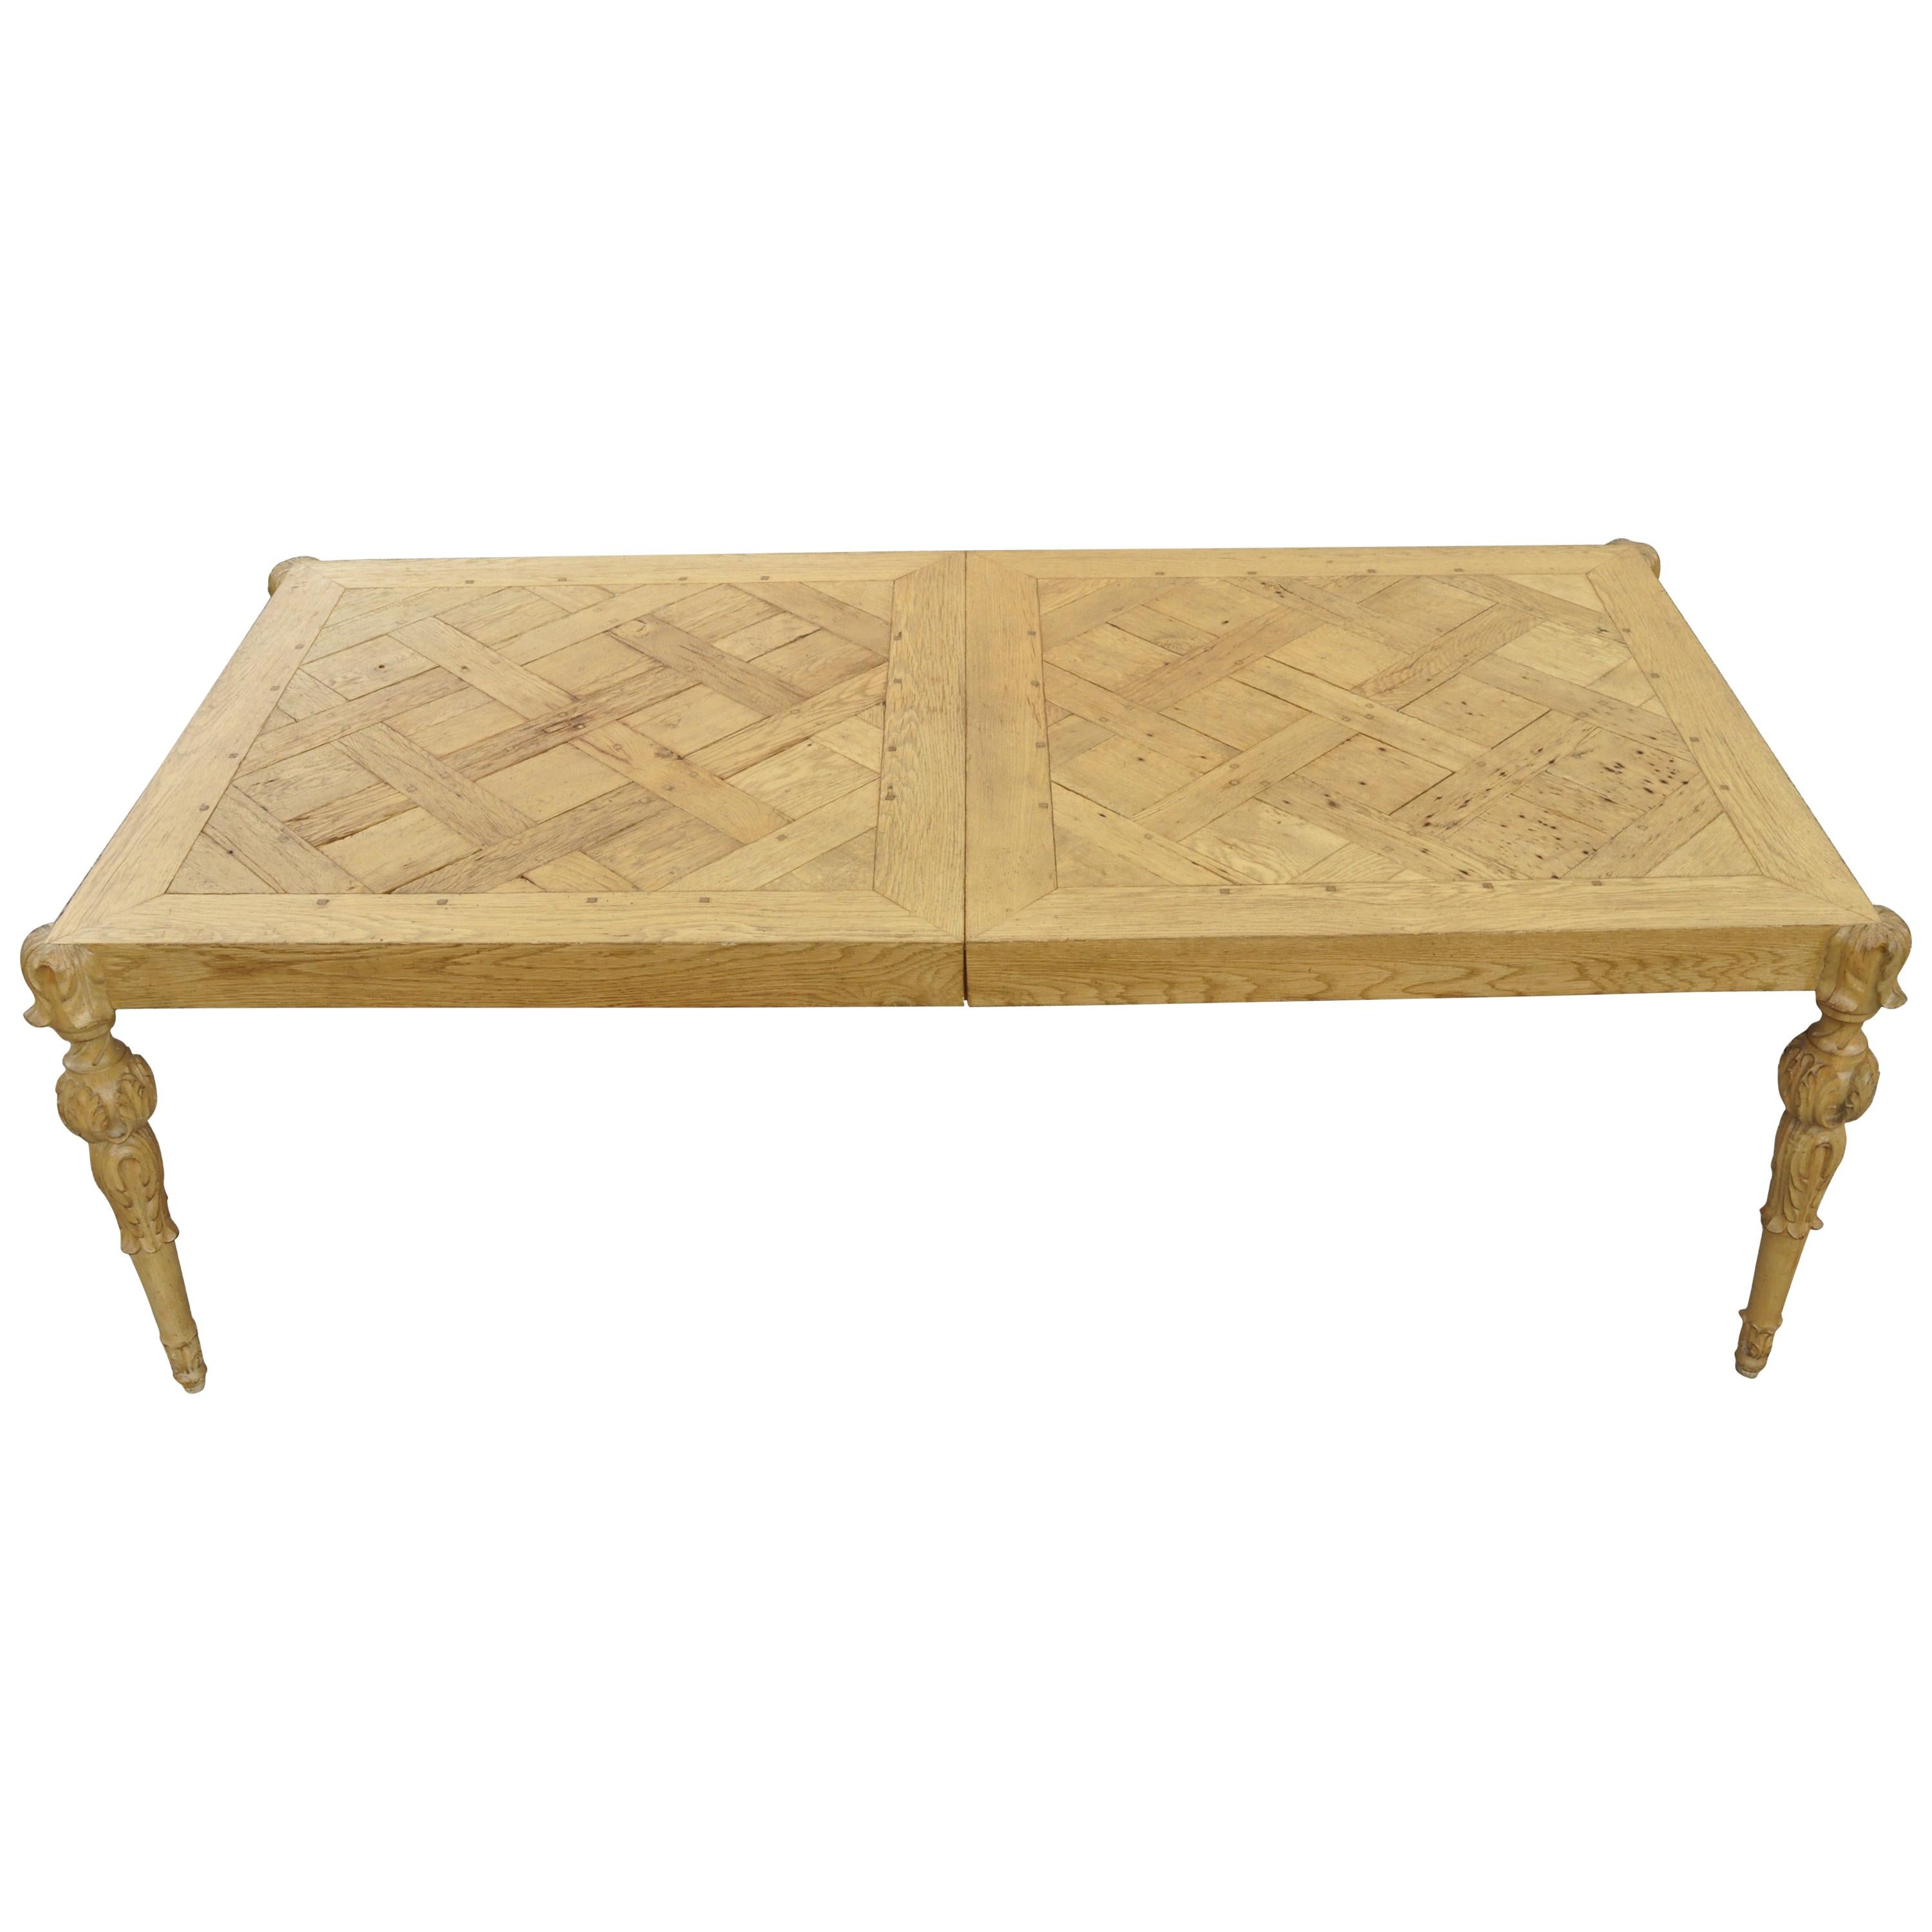 French Baroque Regency Parquetry Inlaid Dining Table of Wood Flooring